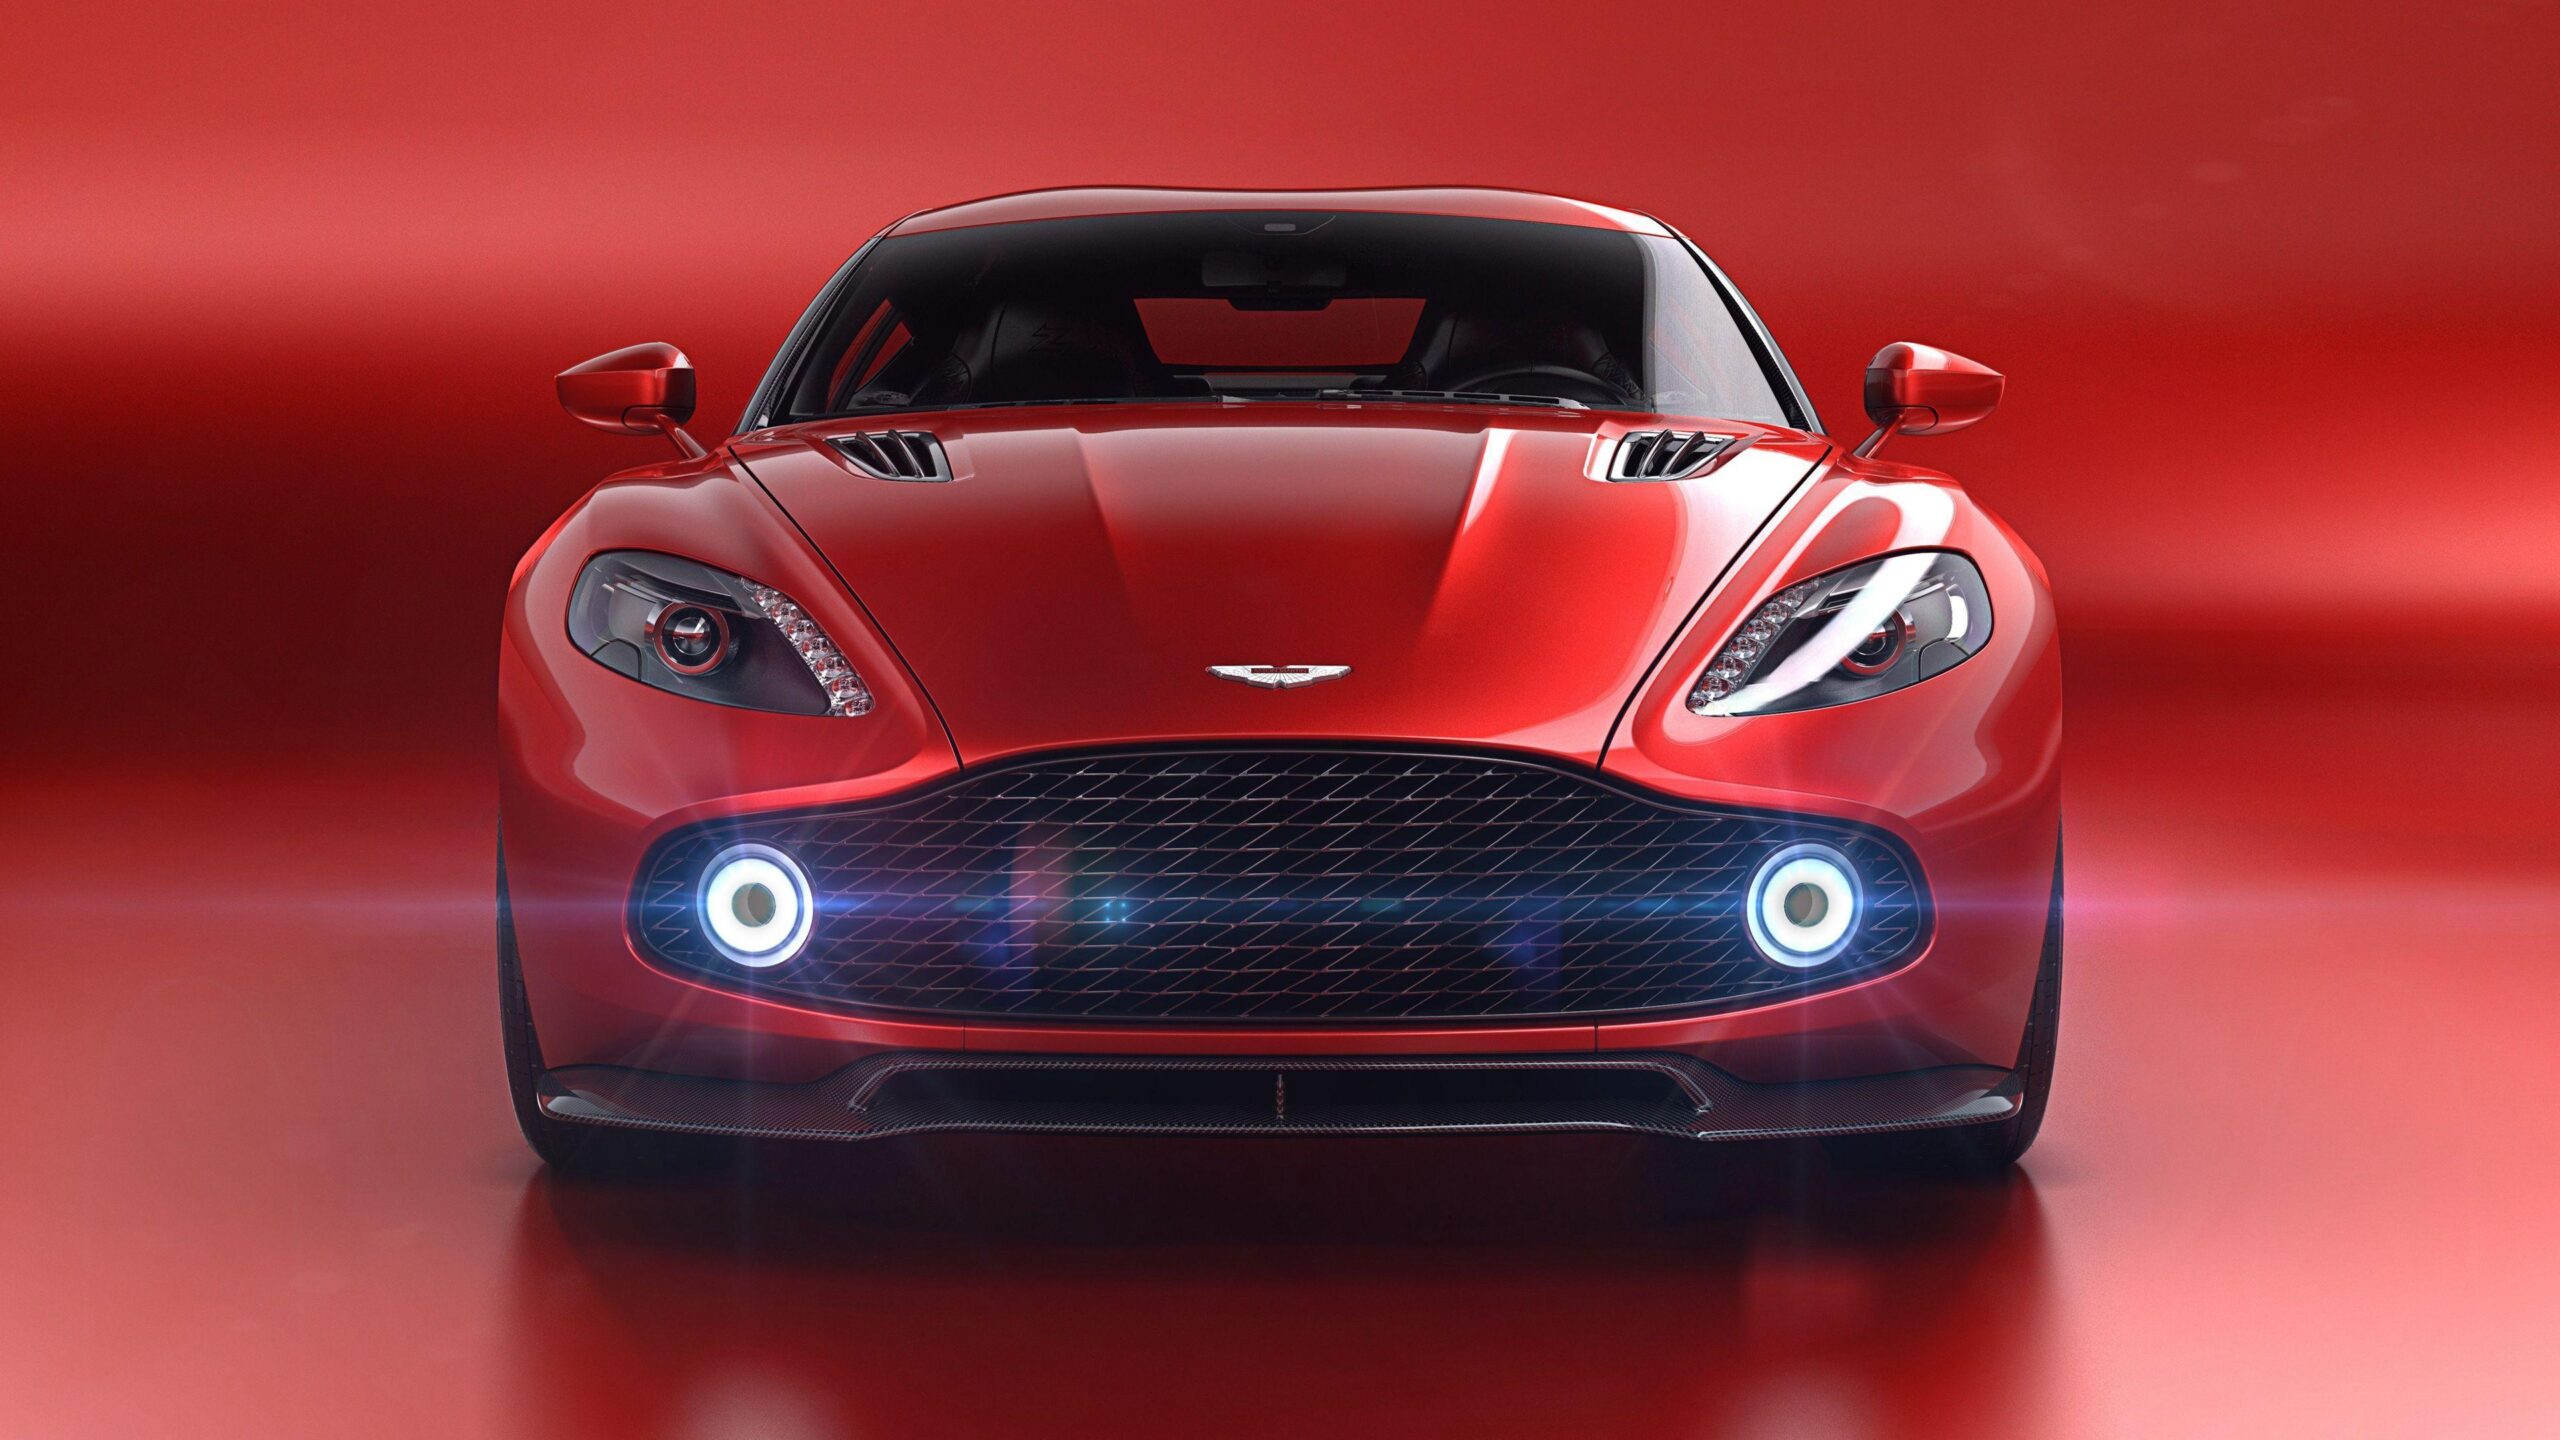 Aston Martin Car Wallpapers,Pictures